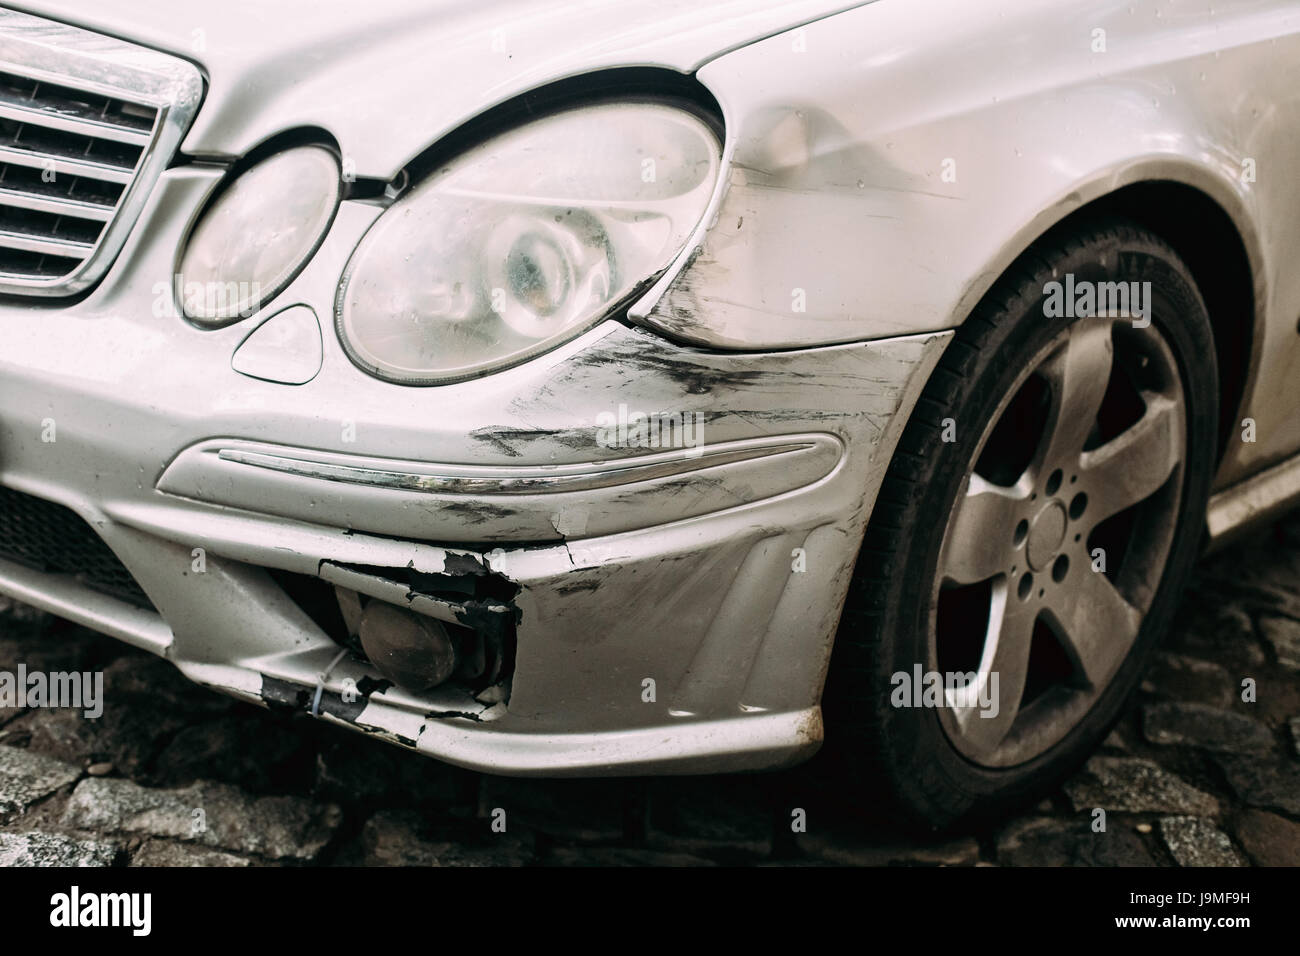 Broken Bumper Luxury Car Scratched With Deep Damage To Paint. Abandoned Car After Accident In City Street Stock Photo